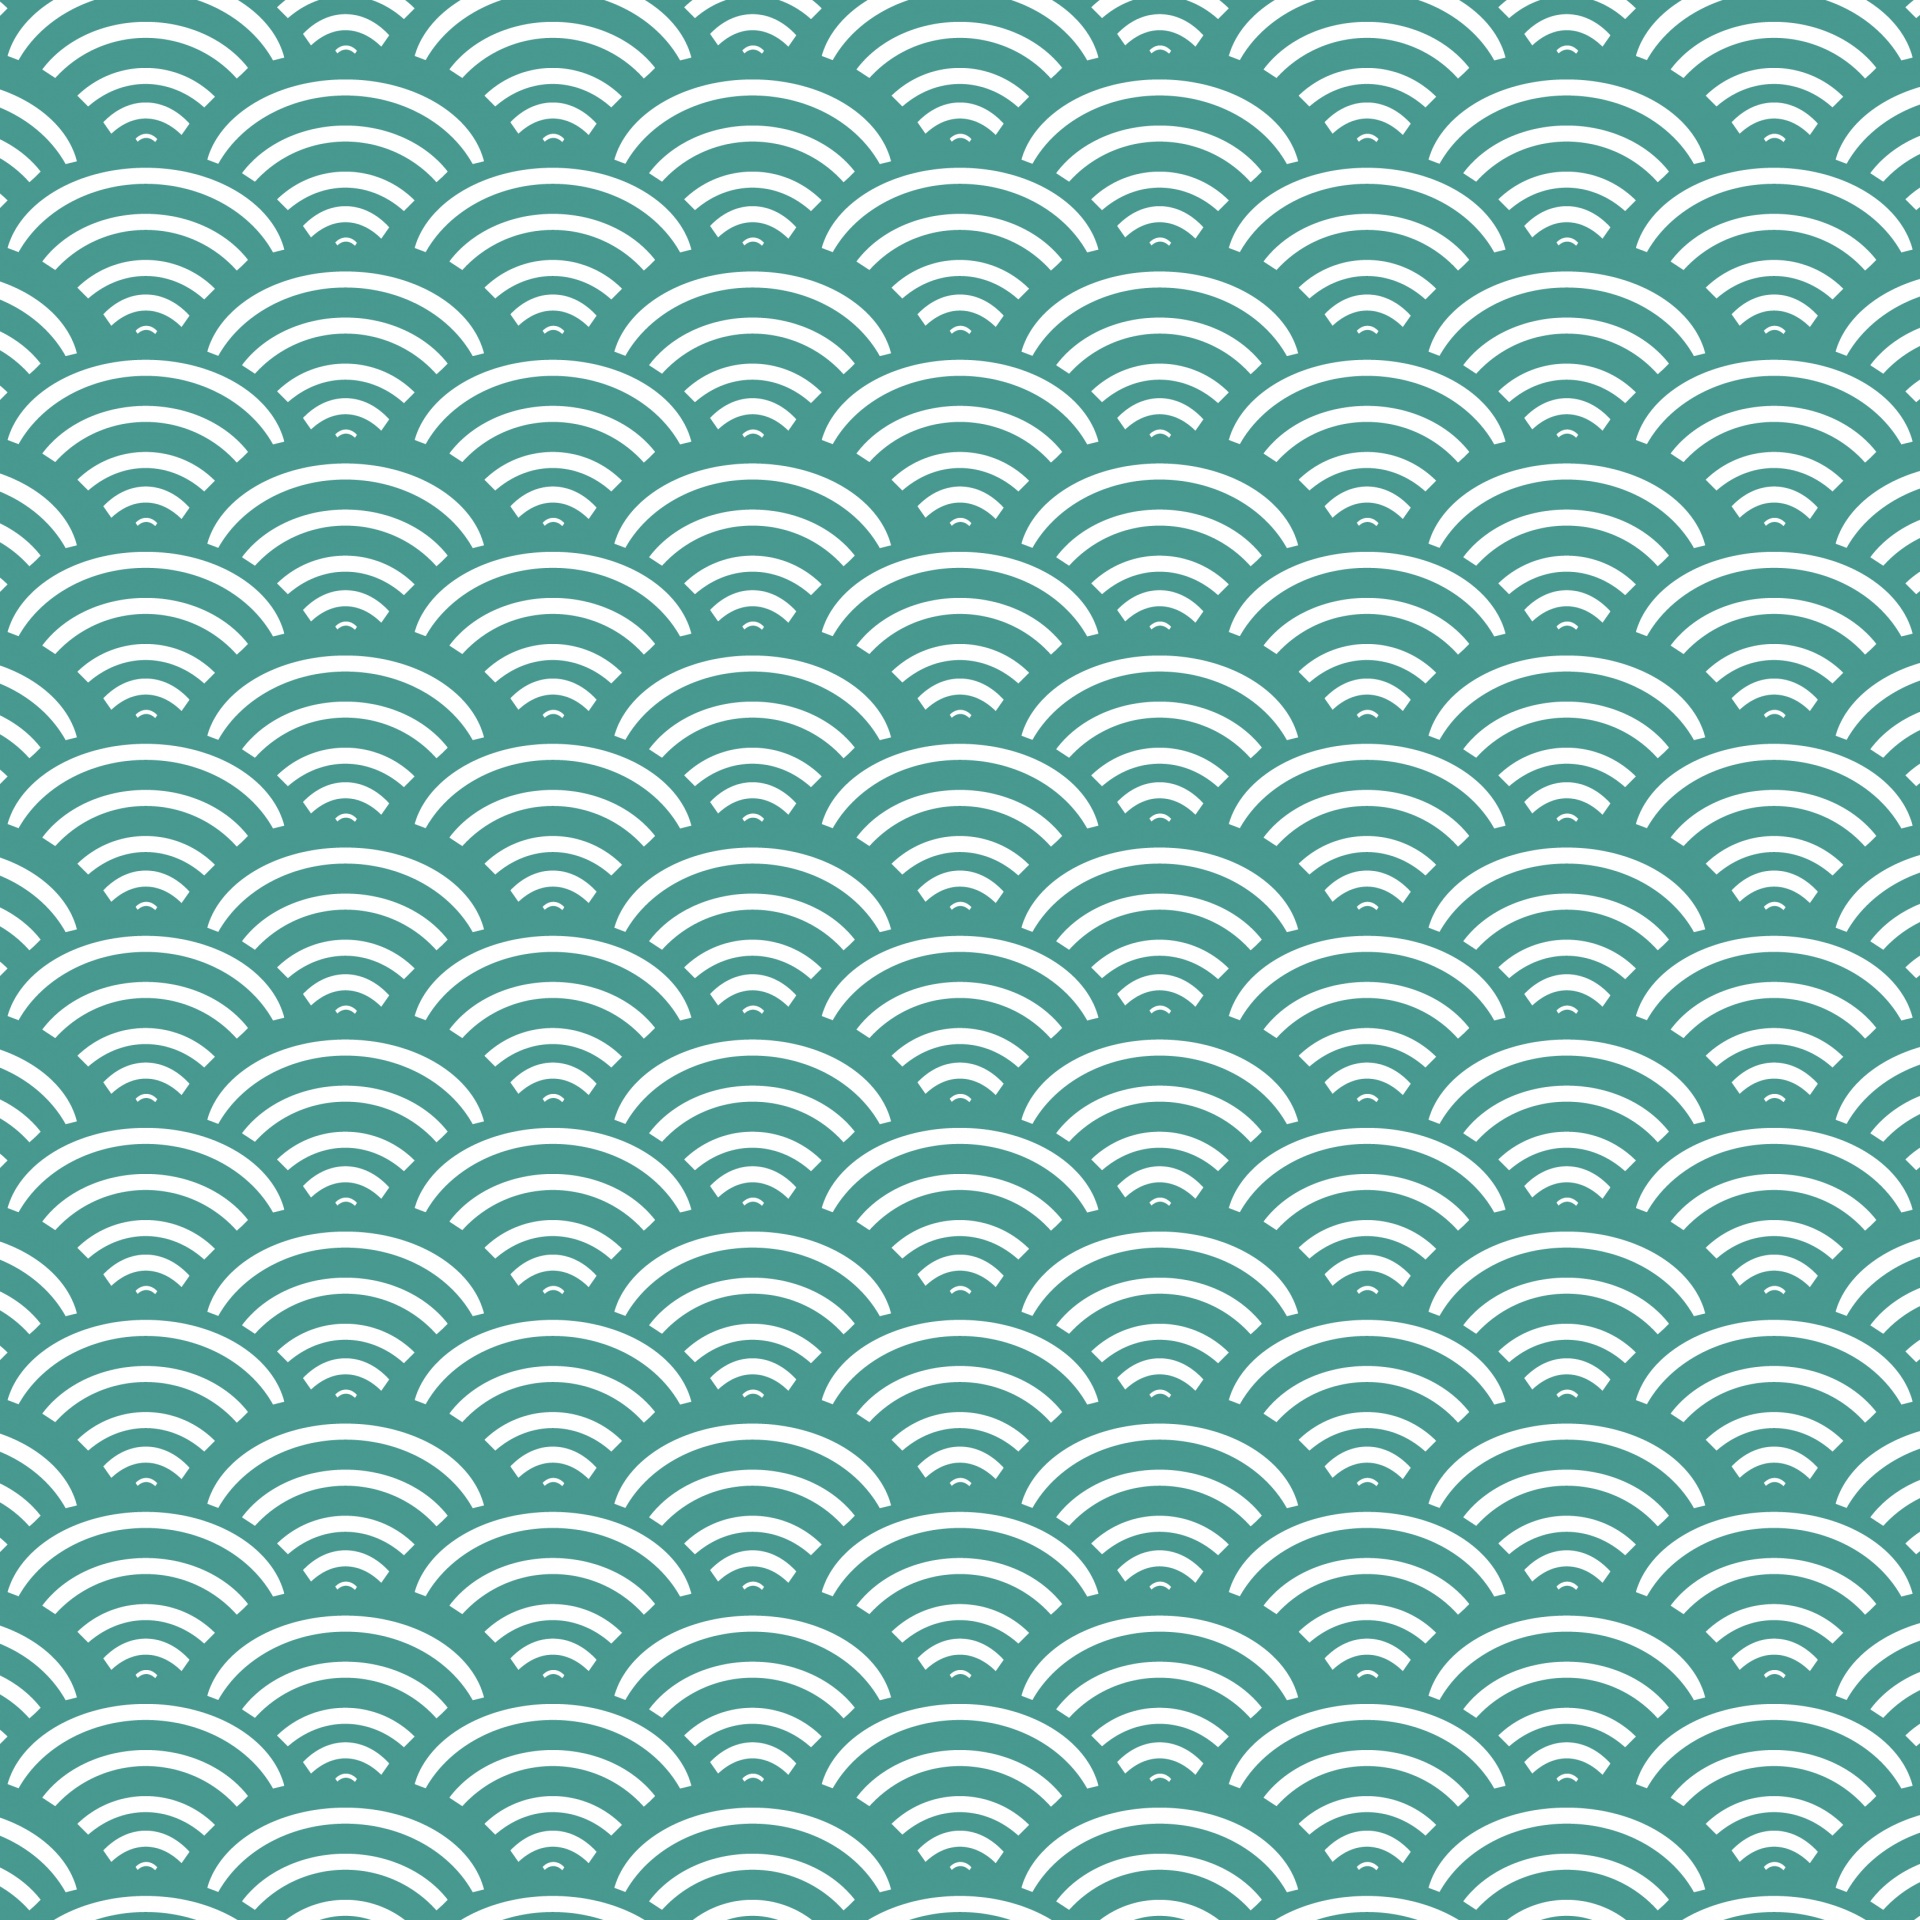 Scales Wallpaper Pattern Background